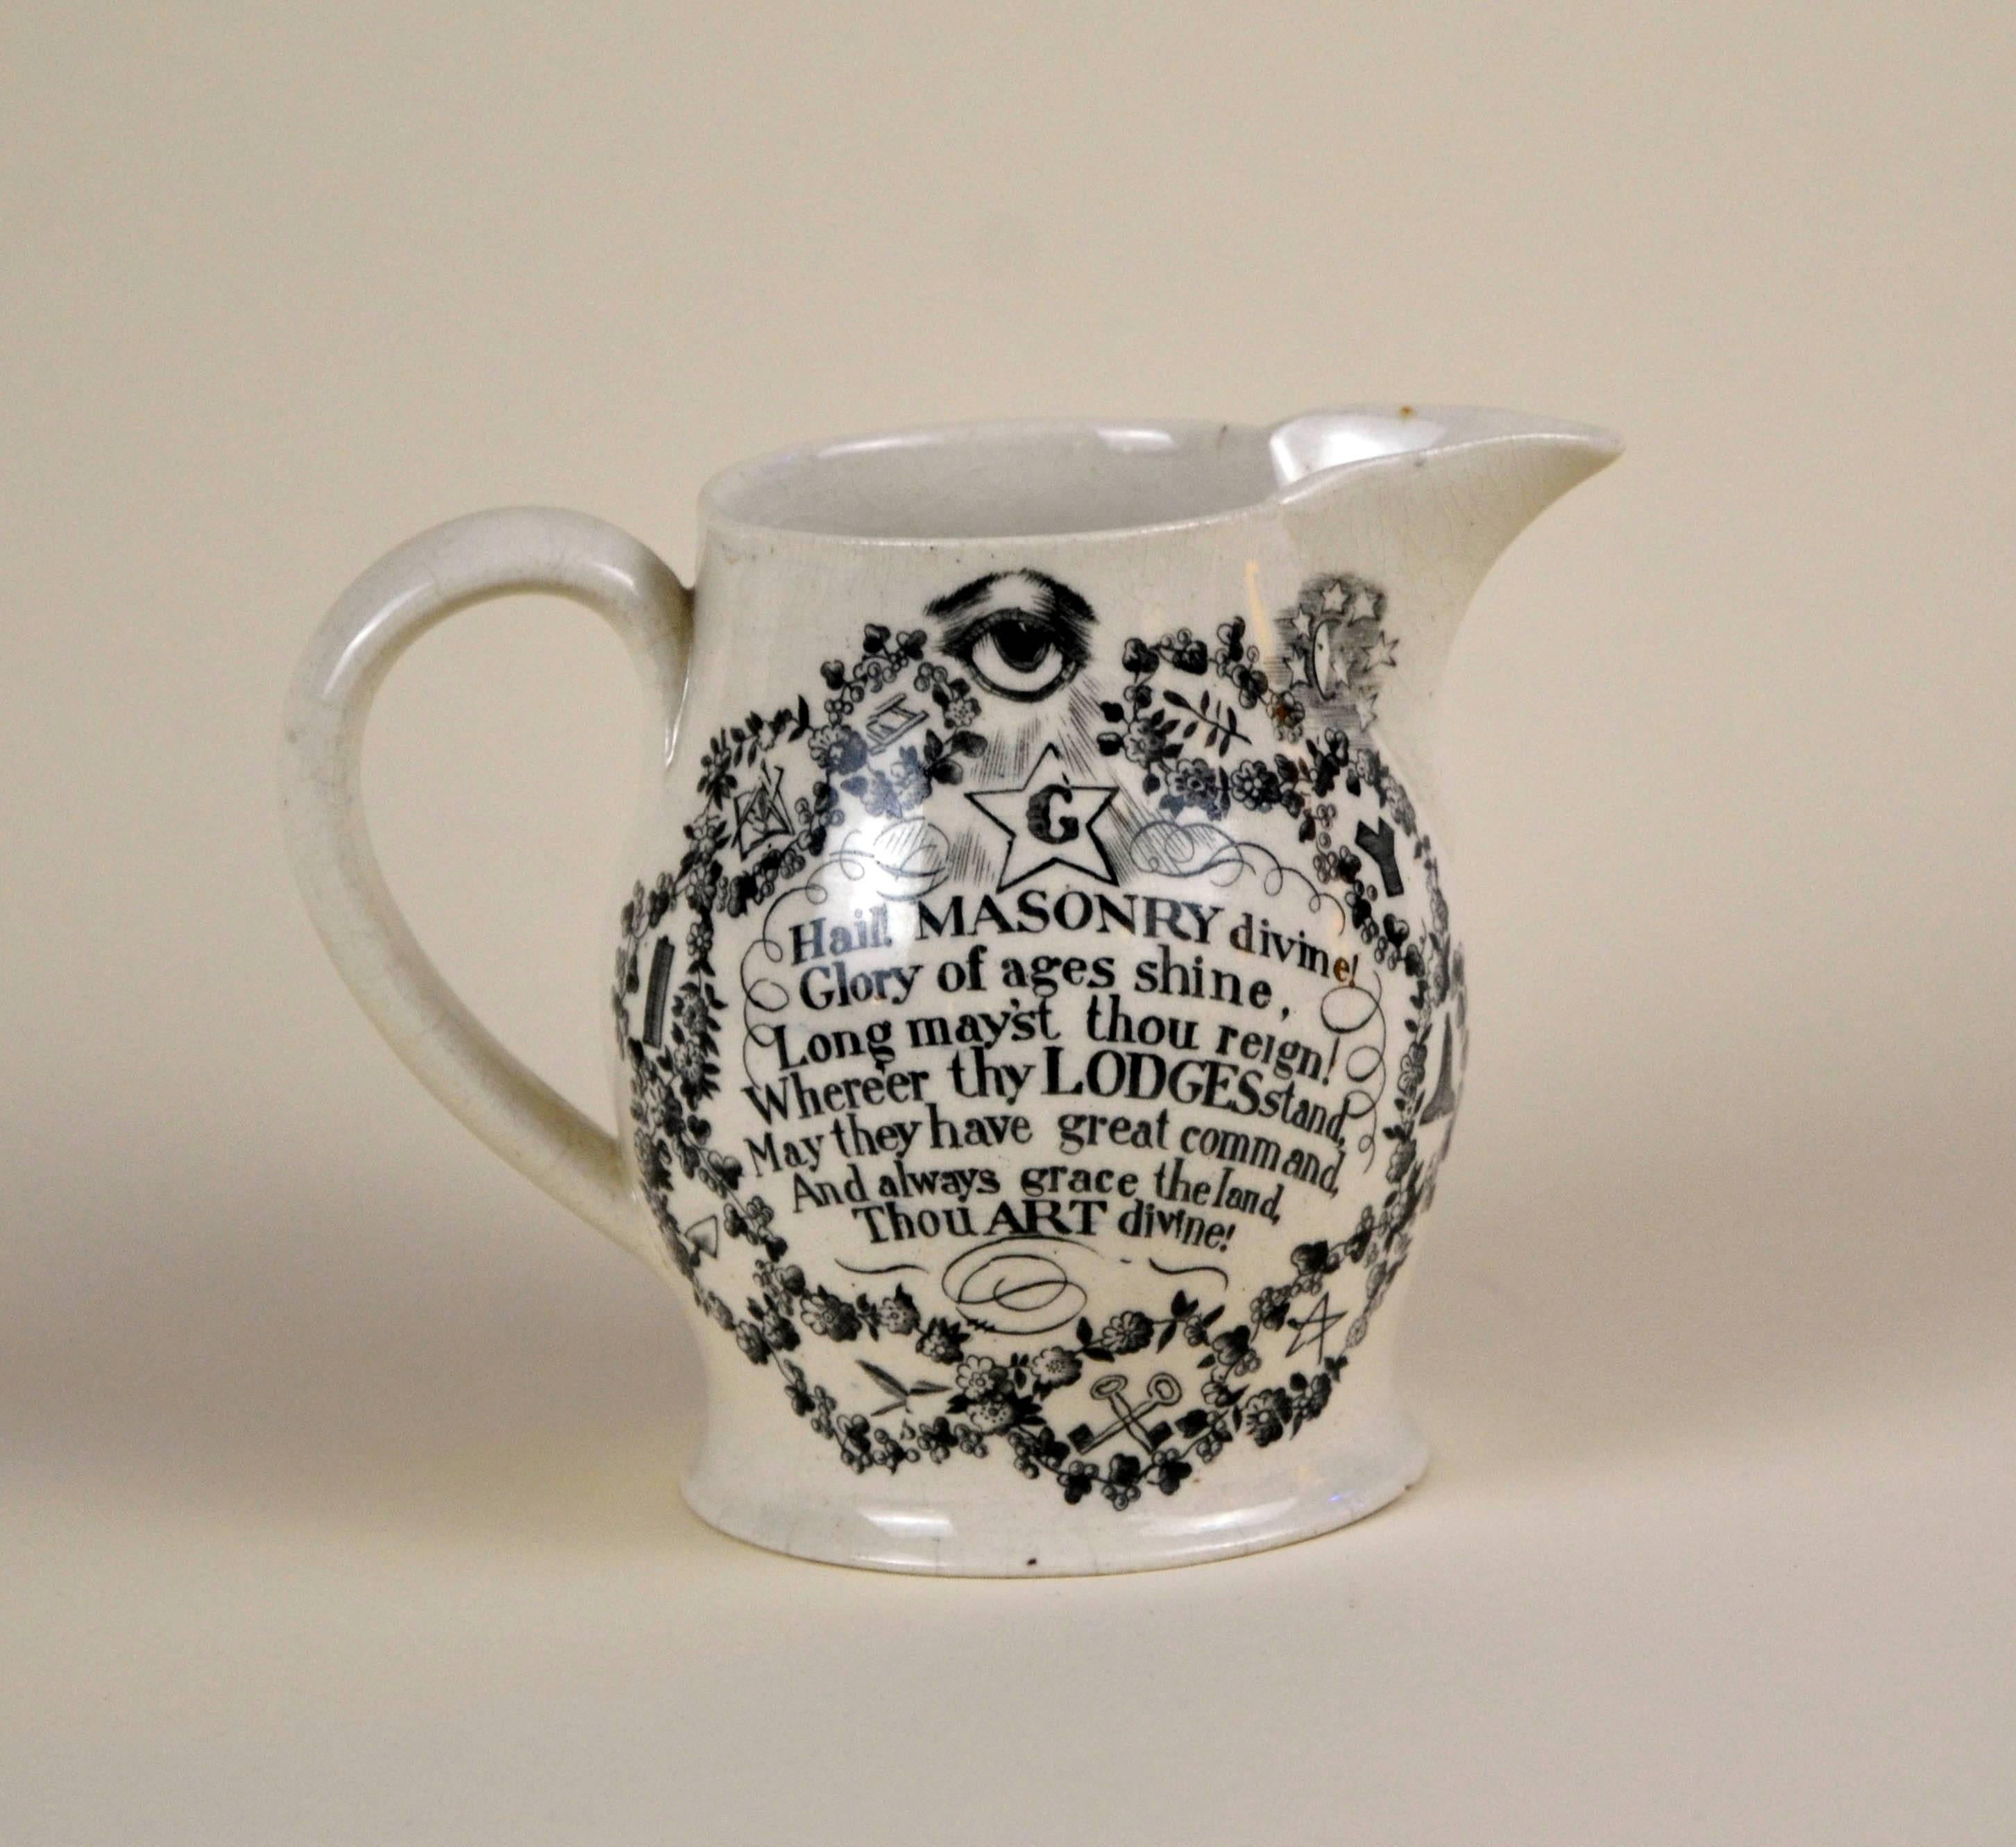 Early example of English Victorian Masonic ware. Cream ware jug with black transfer prints of Masonic symbols and a poem hailing Masonry.

Front: 
sit lux et lux fuit

Back:
Hail, Masonry divine!
Glory of ages, shine!
Long may’st thou reign: